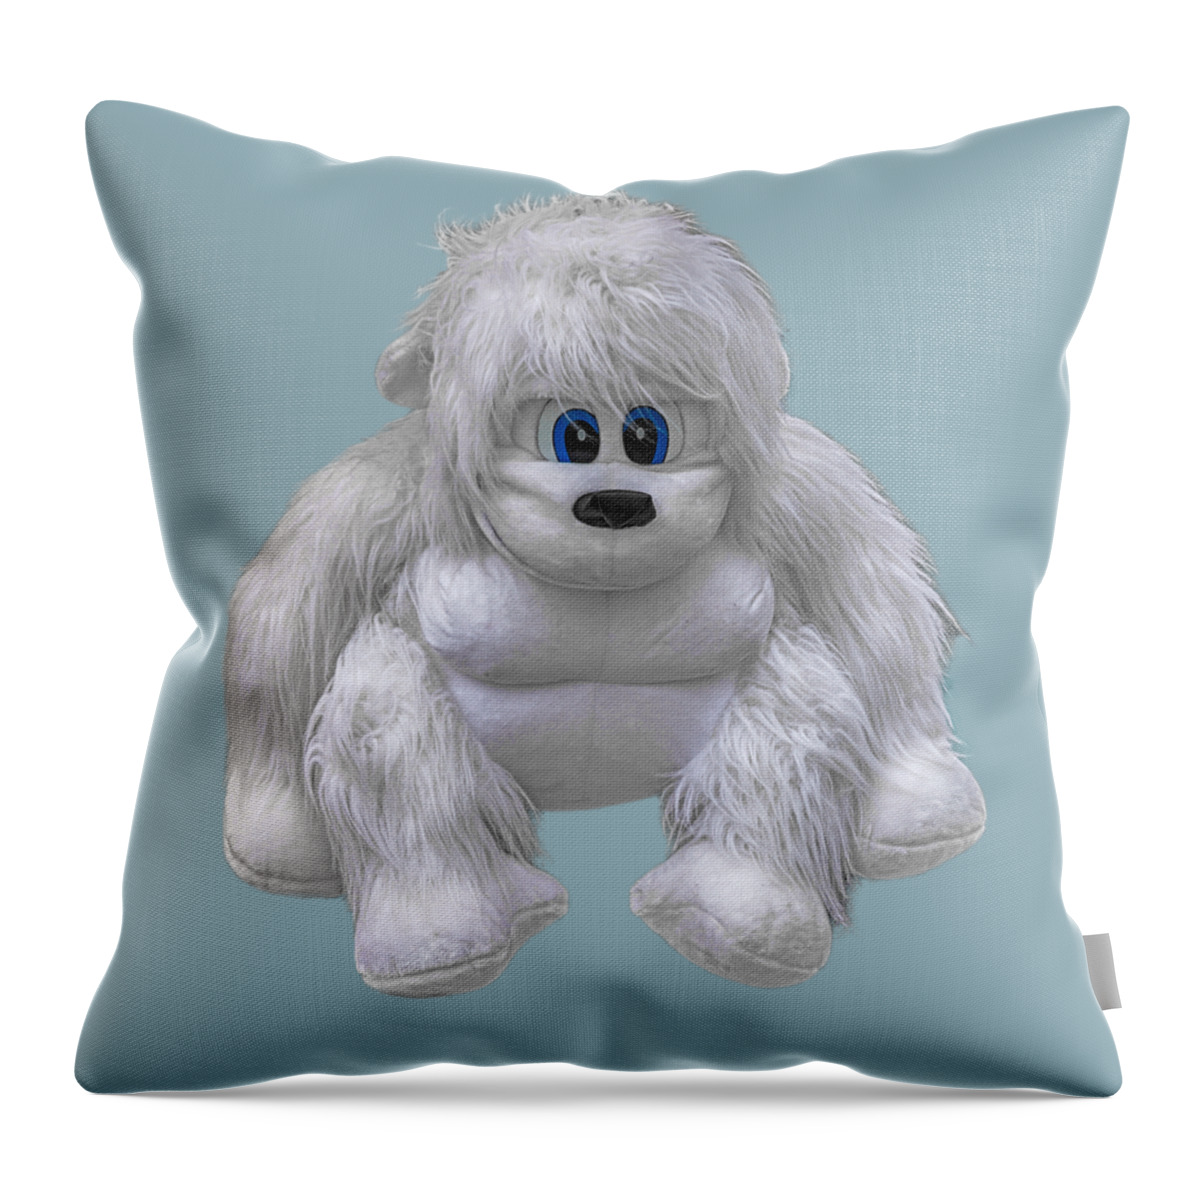 Transparent Background Throw Pillow featuring the photograph Abominable #1 by John Haldane